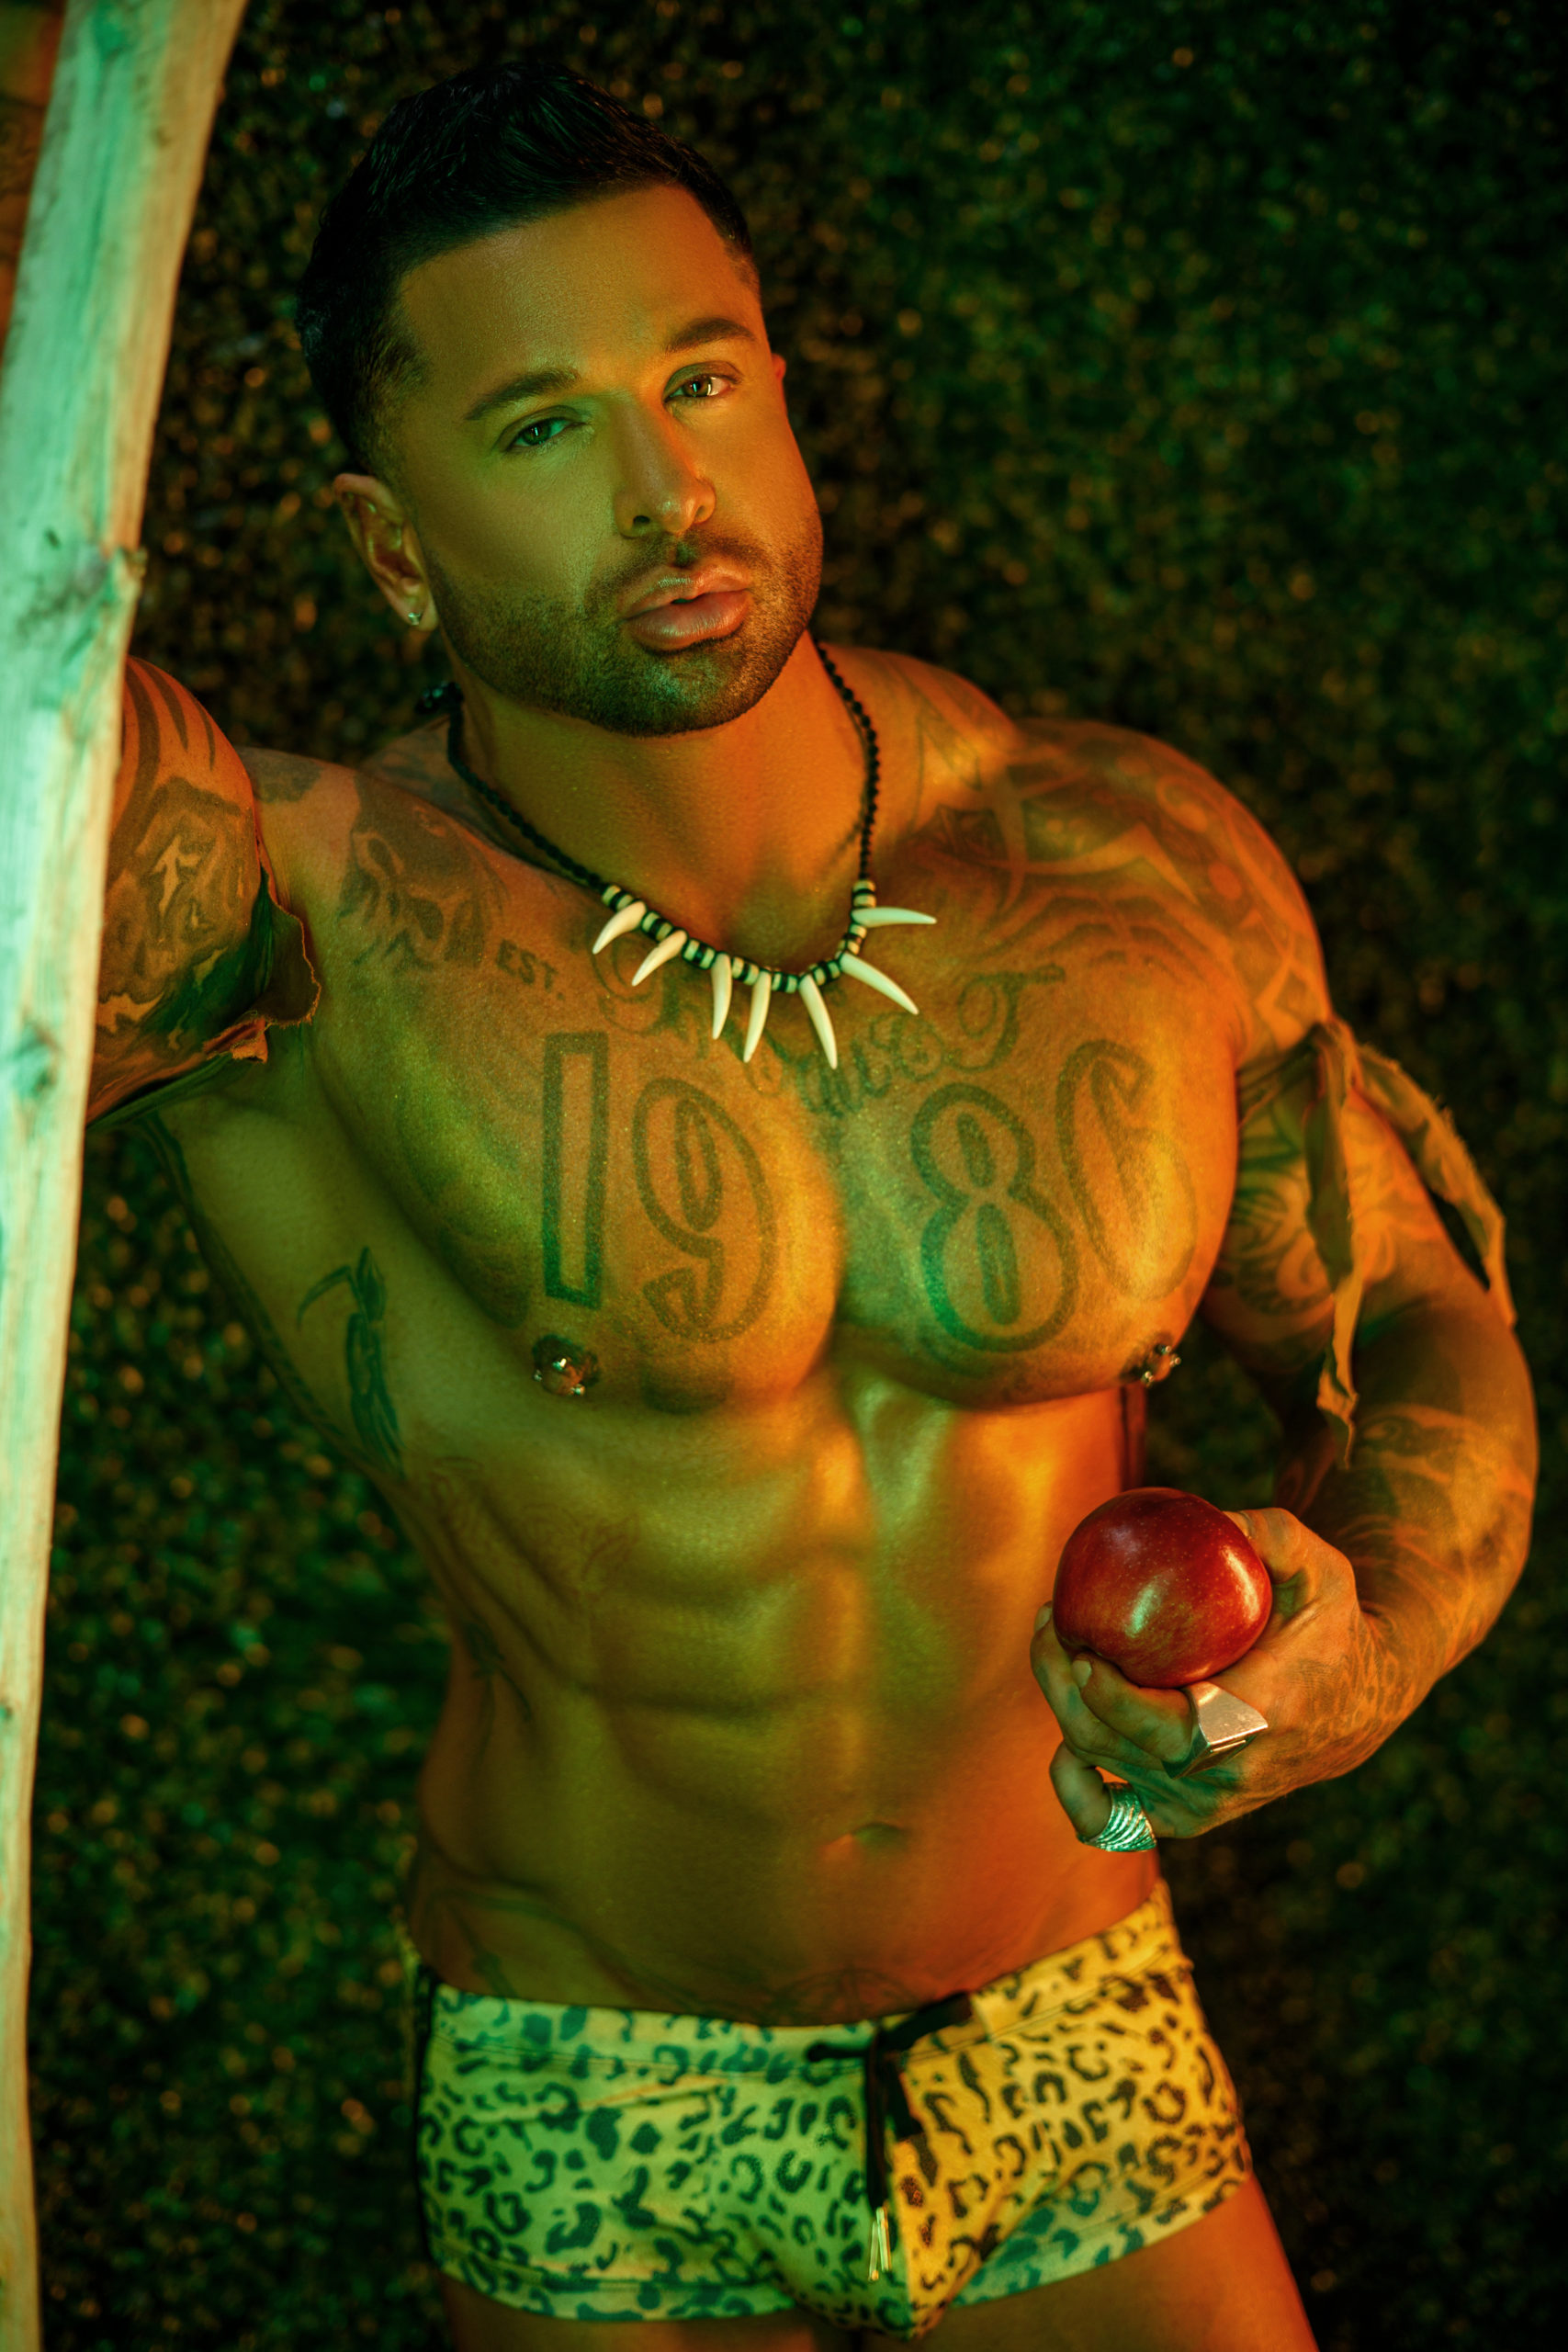 Jersey is a male fitness model and buff butler in Las Vegas